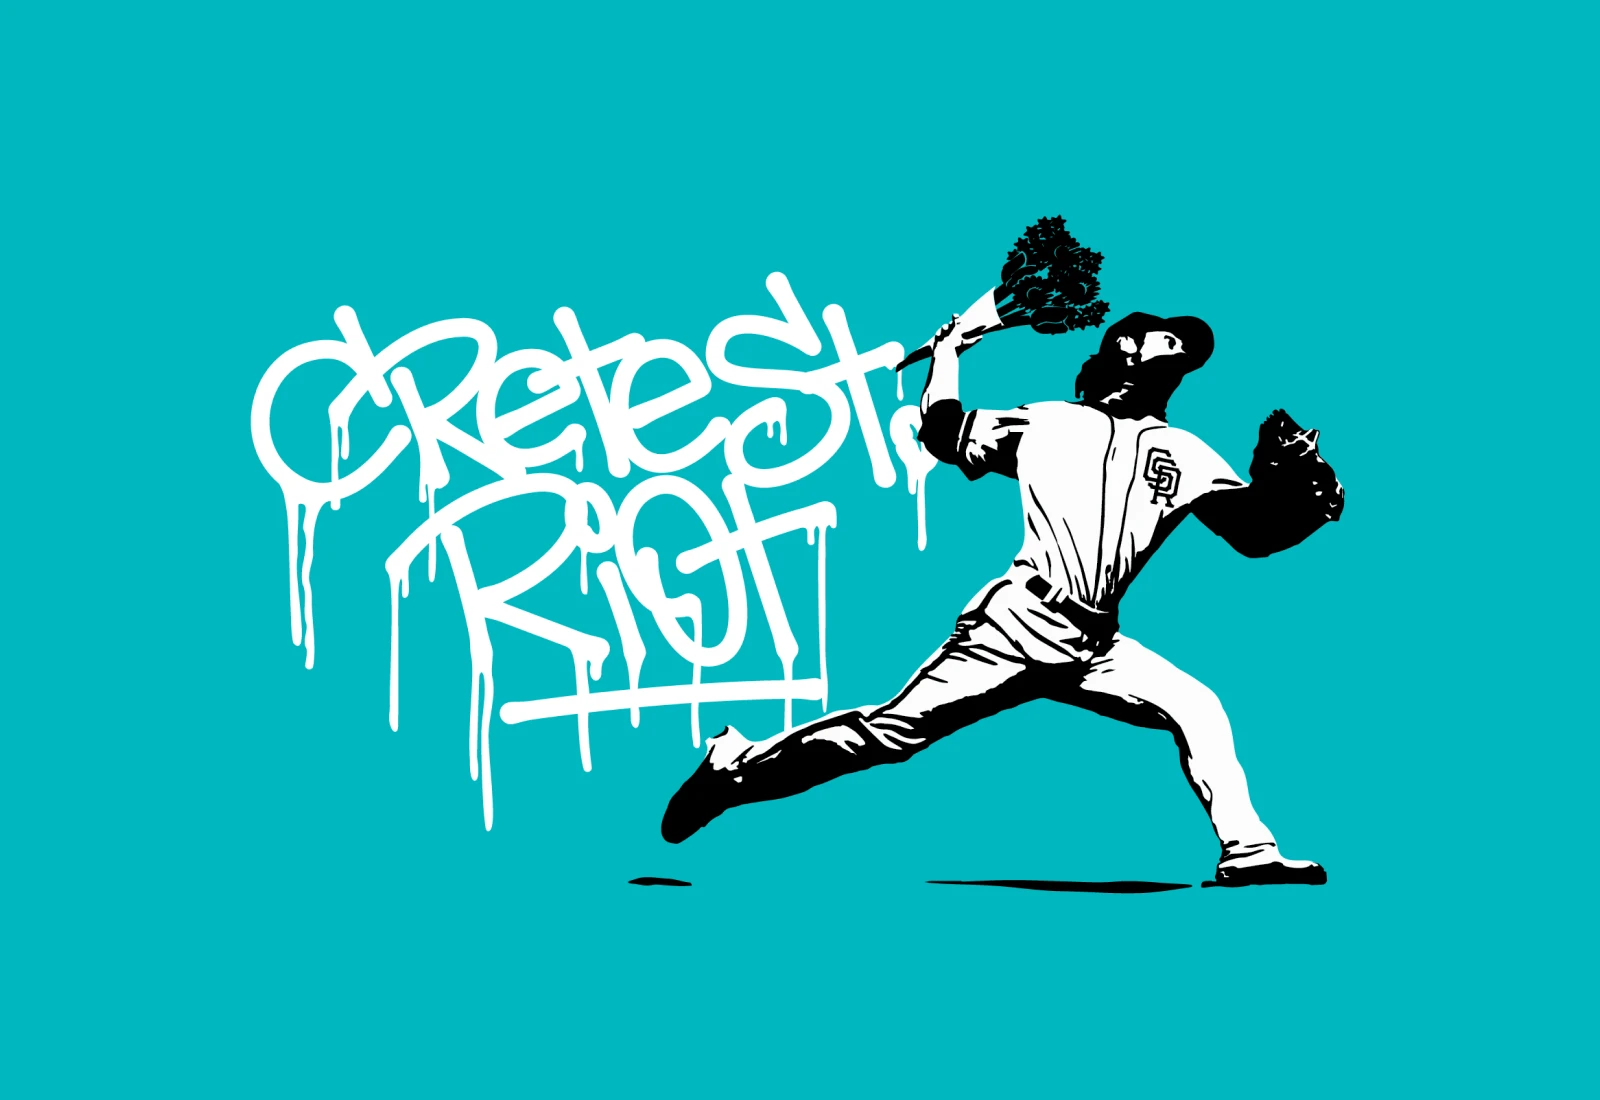 Banksy-inspired stencil of Tim Lincecum throwing a bouquet of flowers with Creet Street Riot in graffiti handstyle